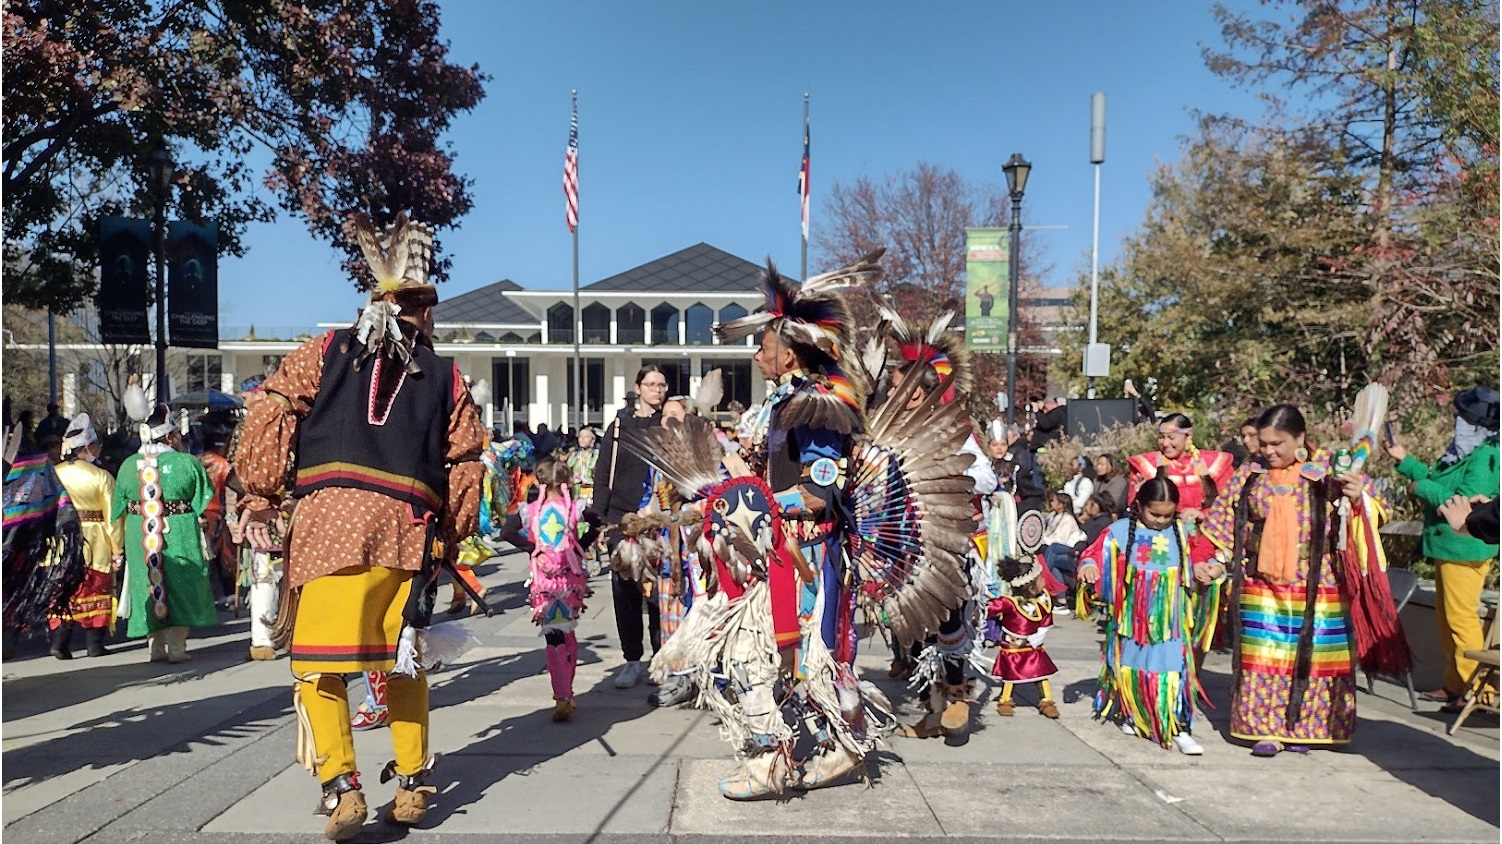 Powwow dance - American Indian Heritage Celebration at North Carolina Museum of History - Parks Recreation and Tourism Management NC State University